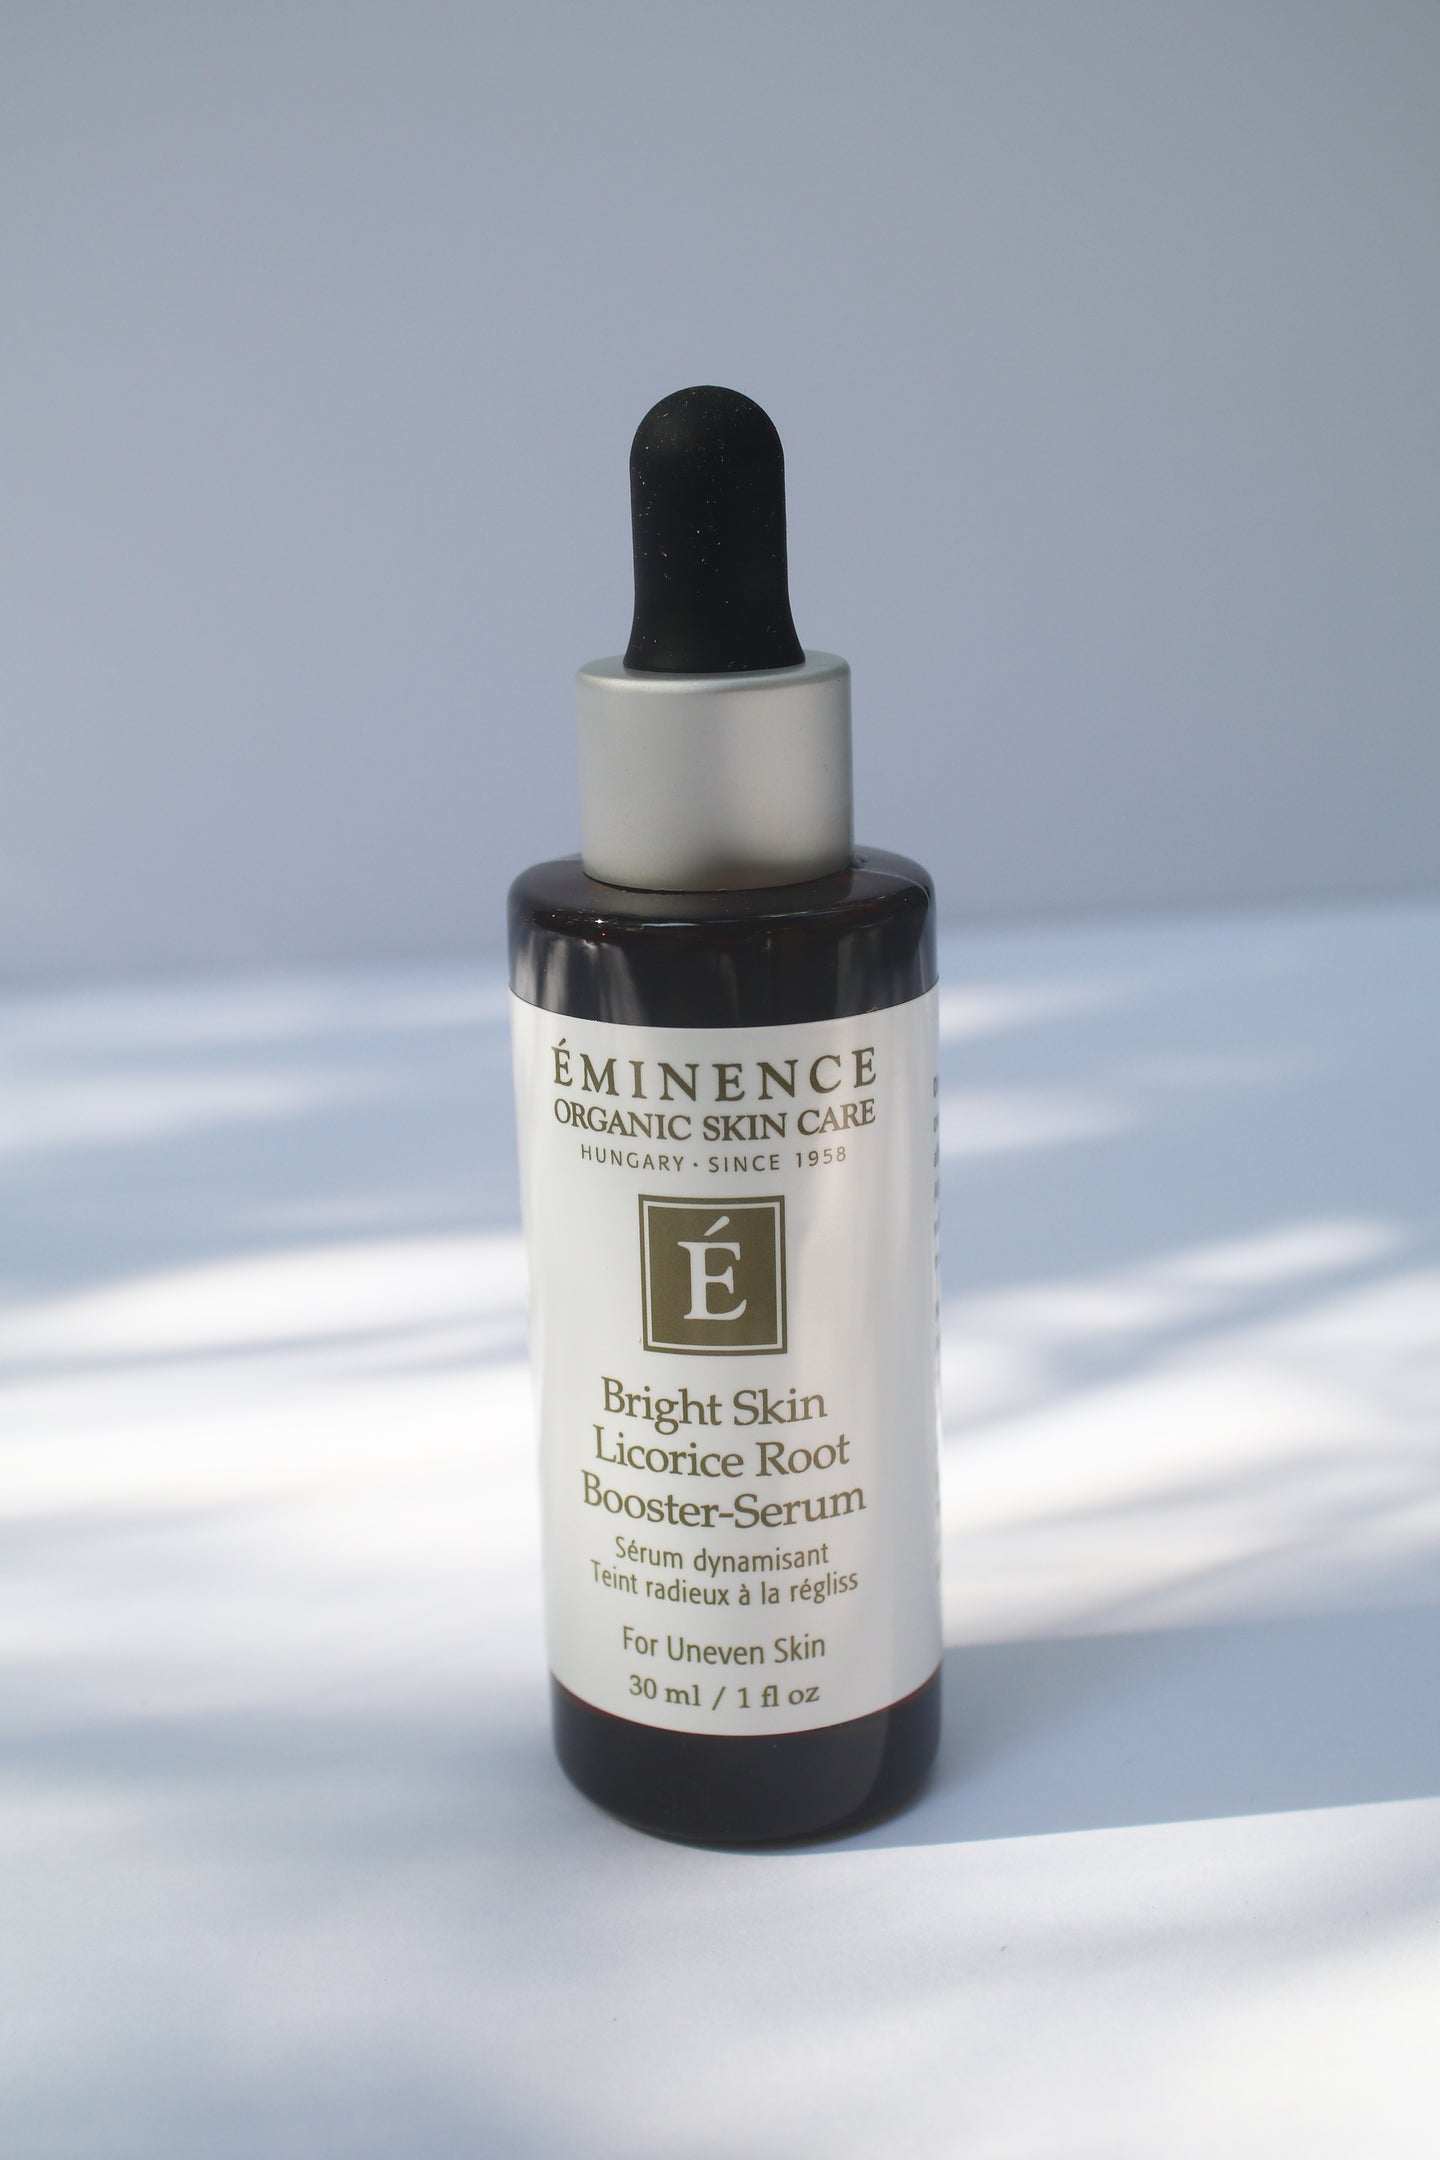 A bottle of the Bright Skin Licorice Root Booster Serum by Eminence